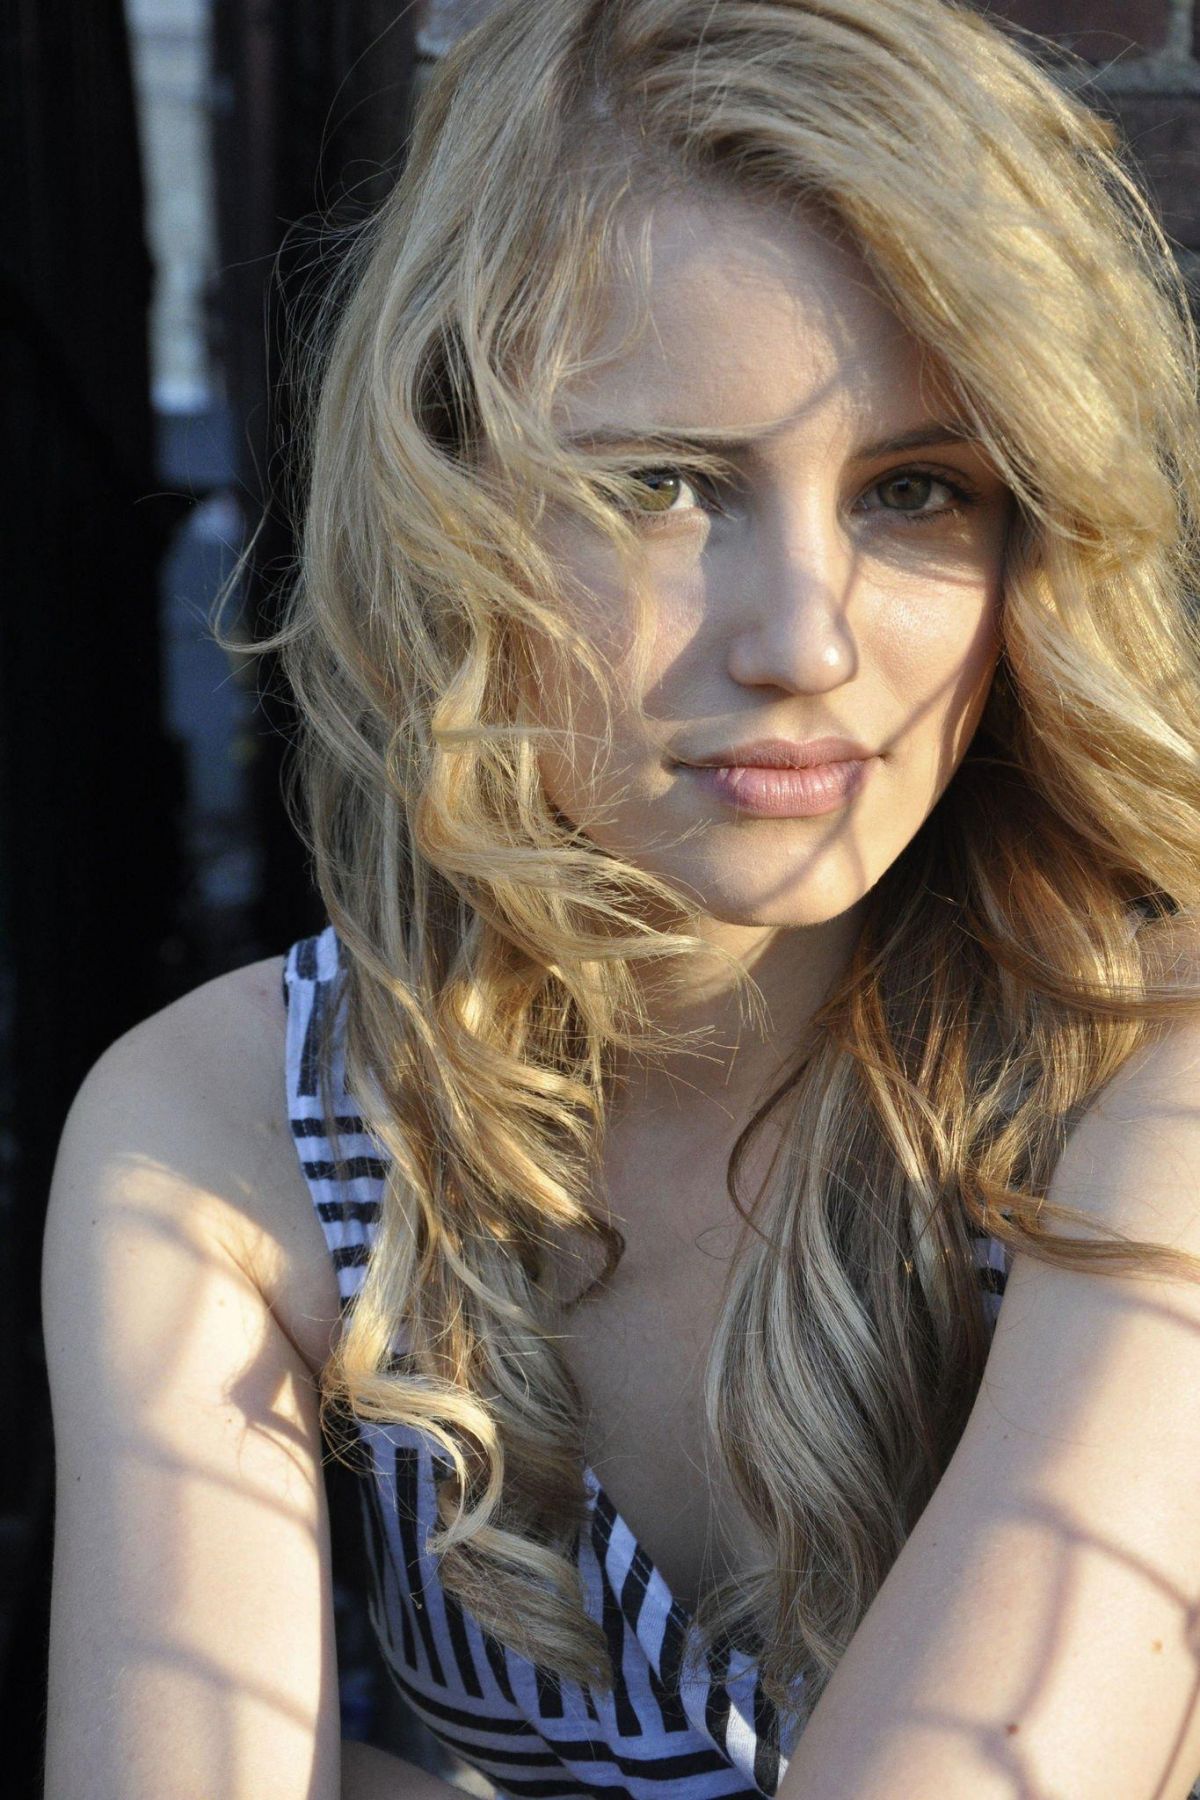 Dianna Agron in Self Assignment photoshoot